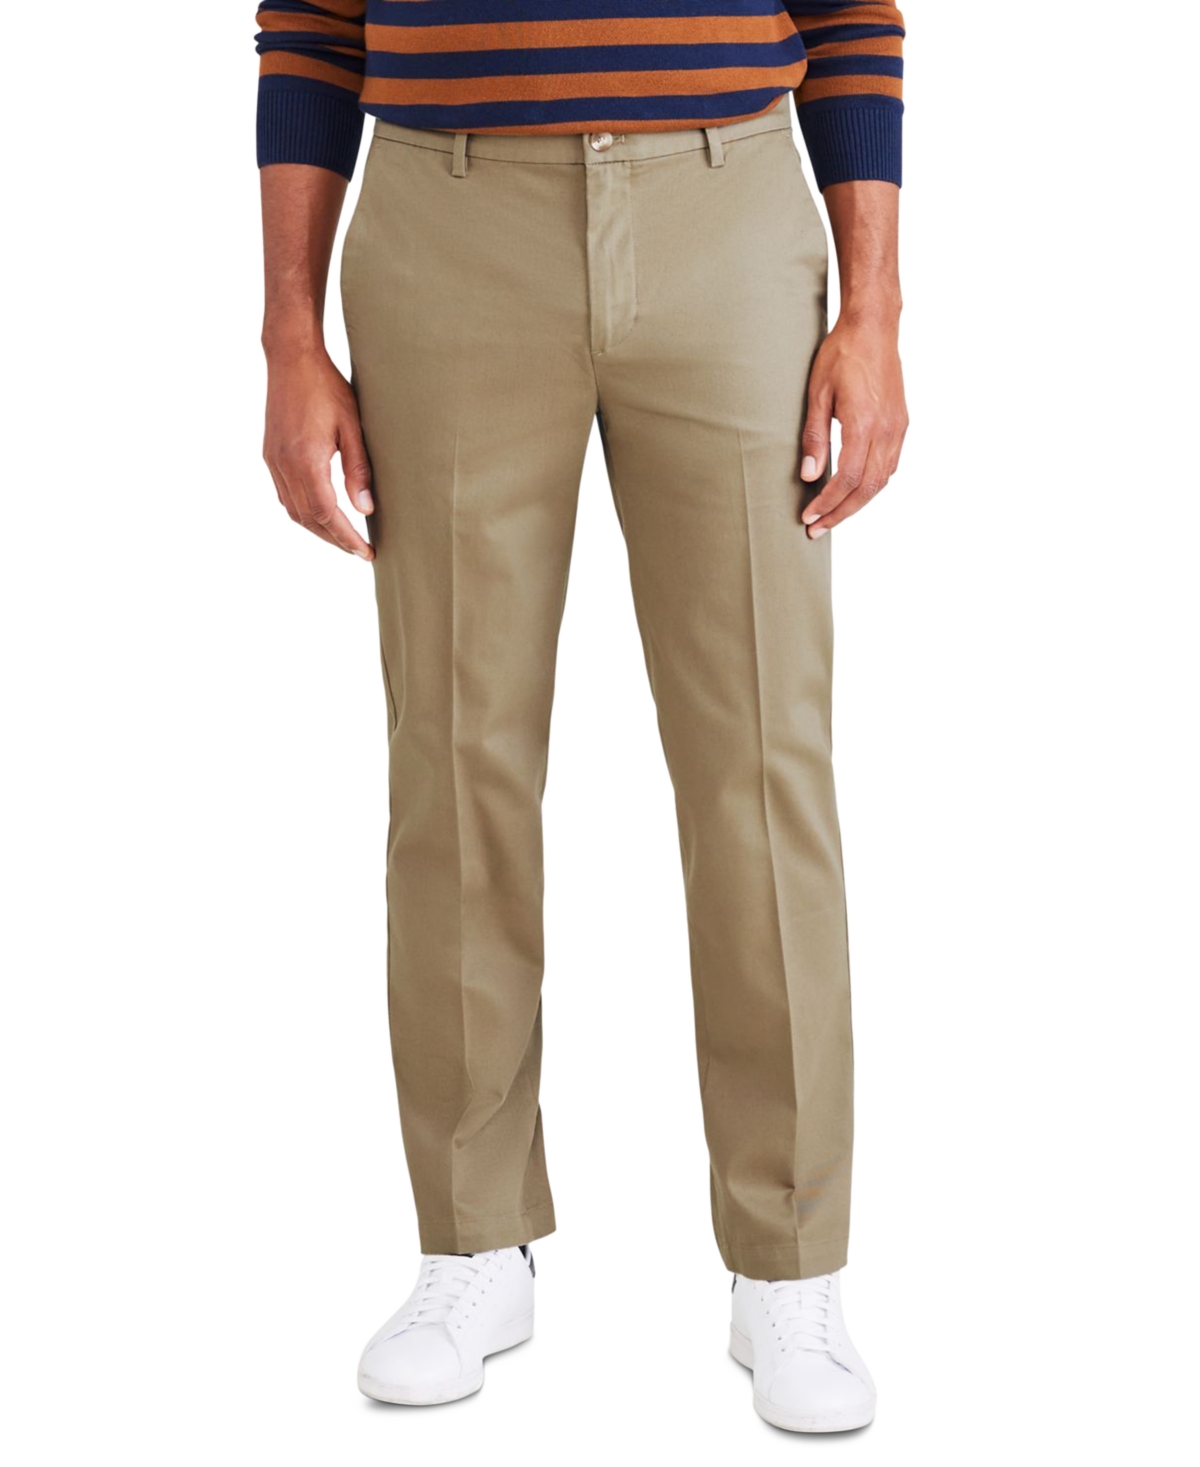 Men's Signature Straight Fit Iron Free Khaki Pants with Stain Defender - Cloud